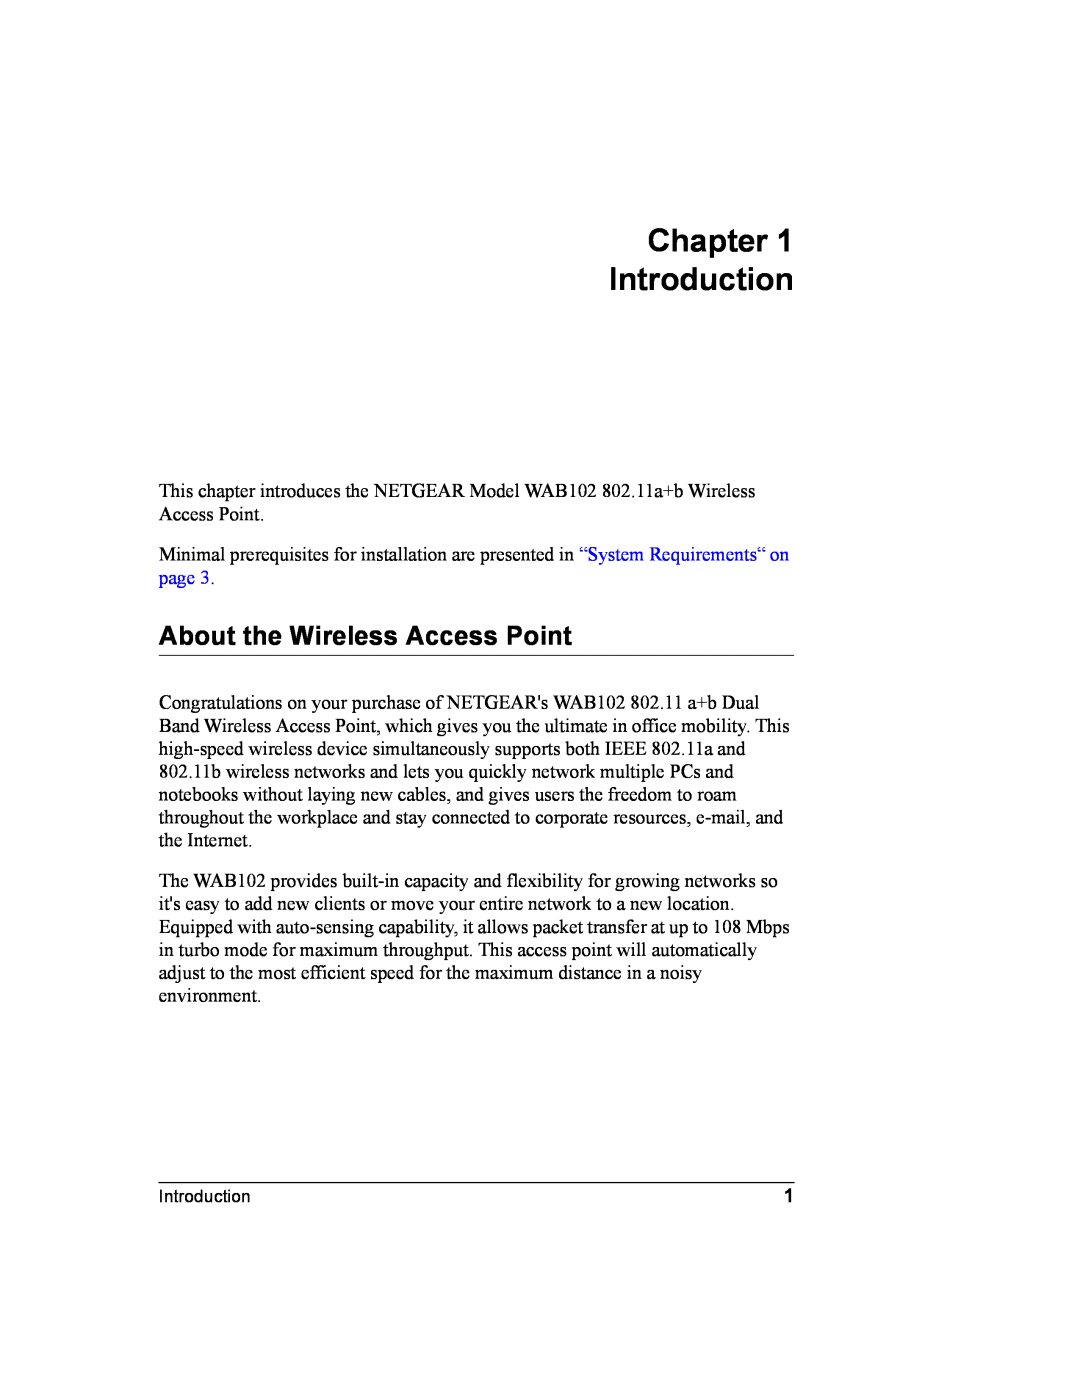 NETGEAR WAB102 manual Chapter Introduction, About the Wireless Access Point 